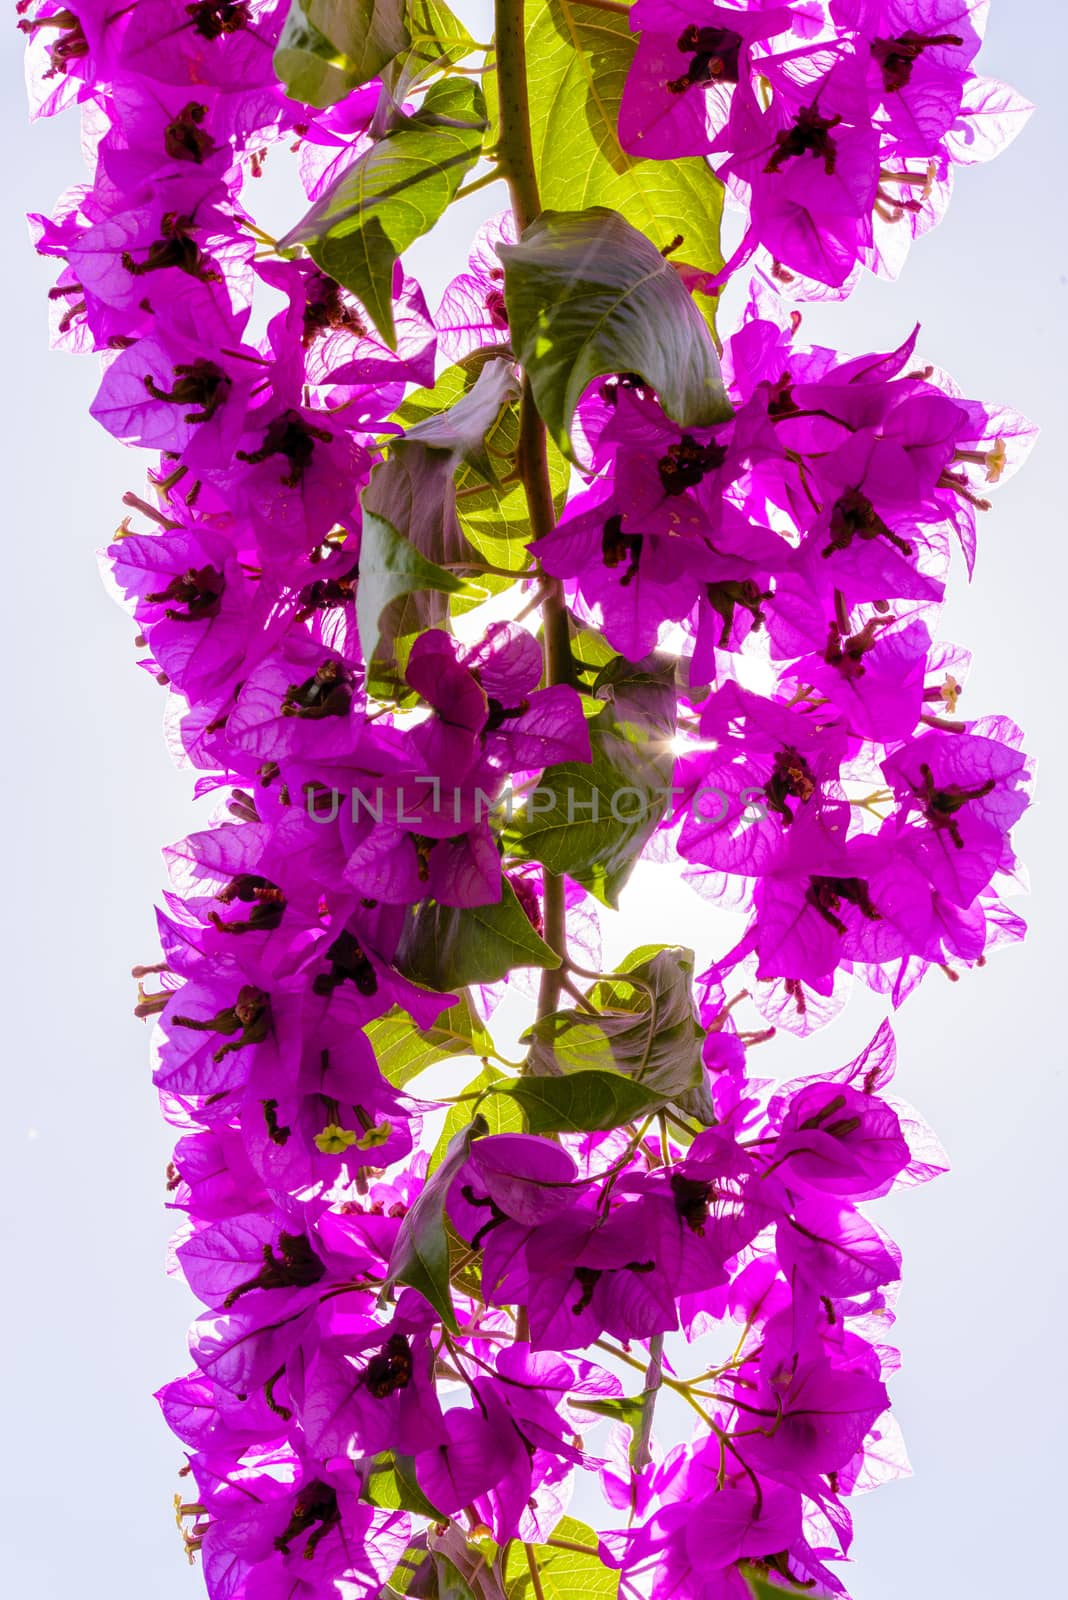 Bougainvilleas or Paper flower treetop against blue sky as background and backlit with sunstars pouring through the blossoms